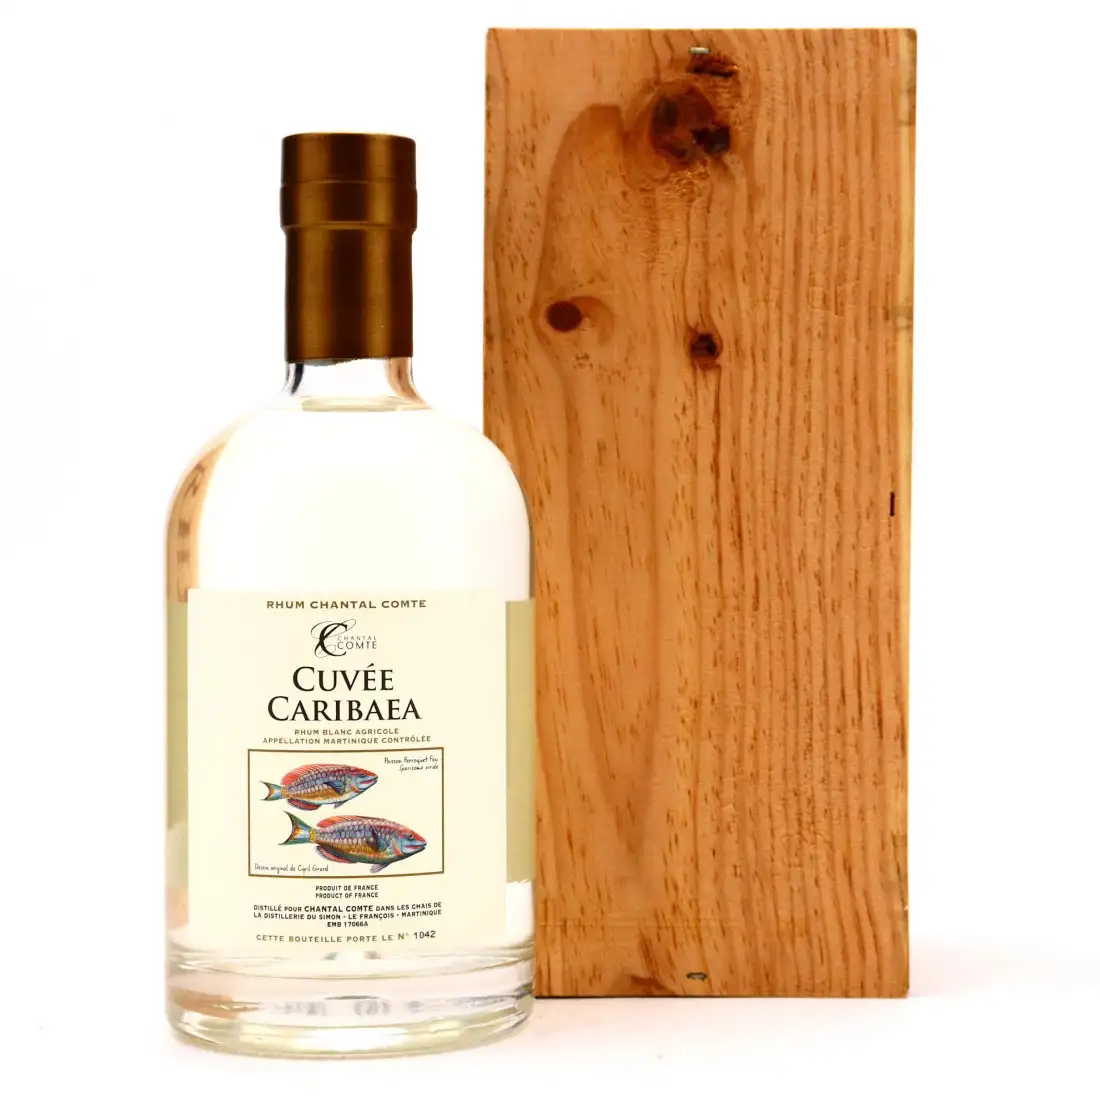 Image of the front of the bottle of the rum Cuvée Caribaea